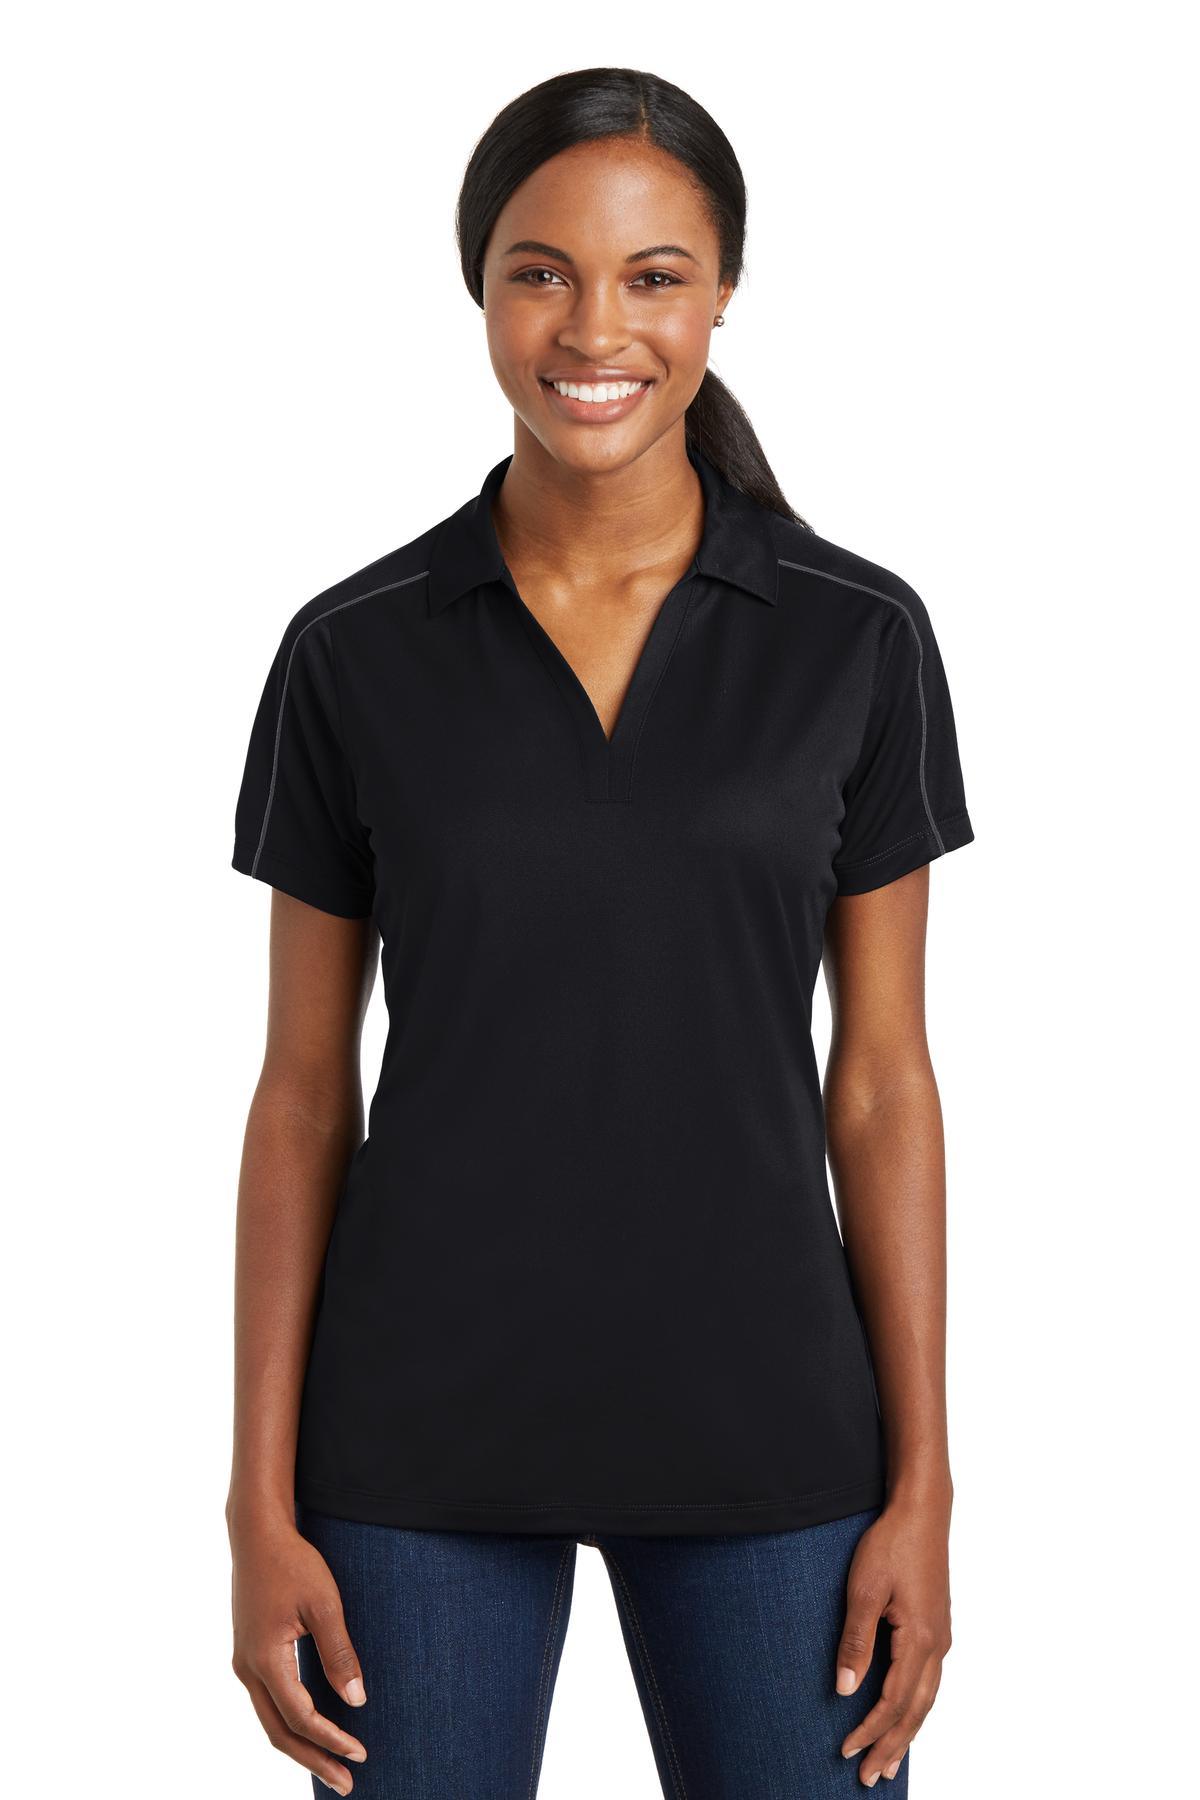 Sport-Tek Ladies Micropique Sport-Wick Piped Polo. LST653 - Dresses Max